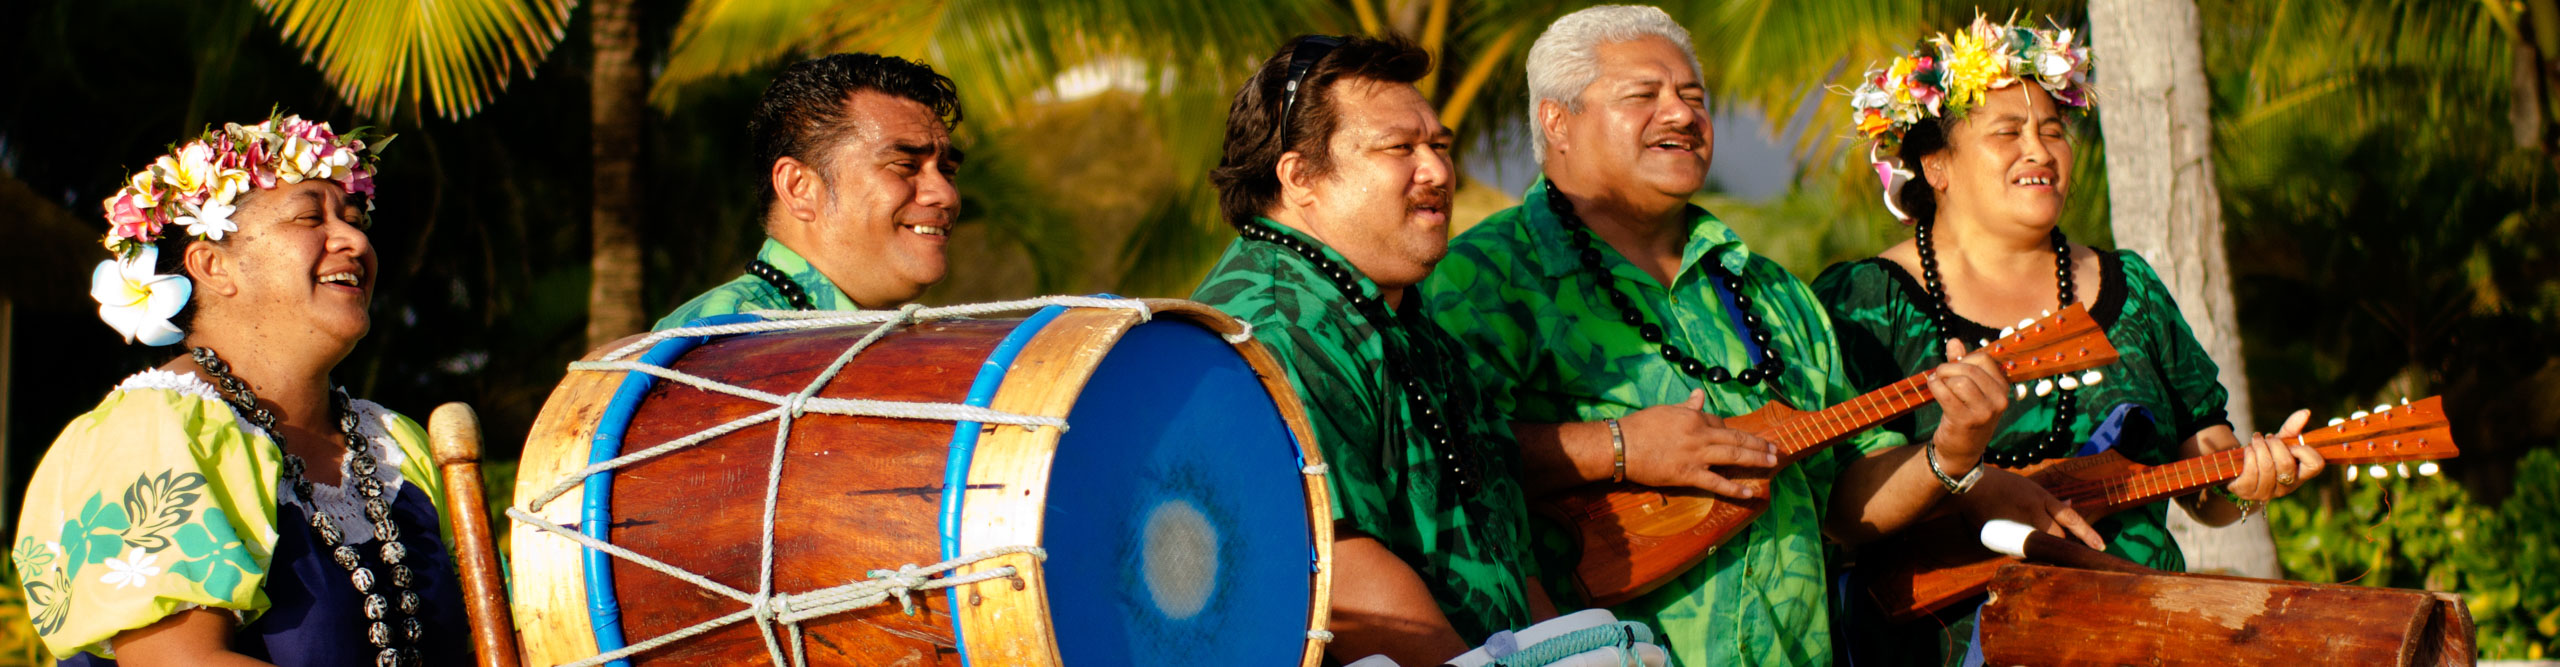 Polynesian group singing and playing instuments on stage in the Cook Islands 